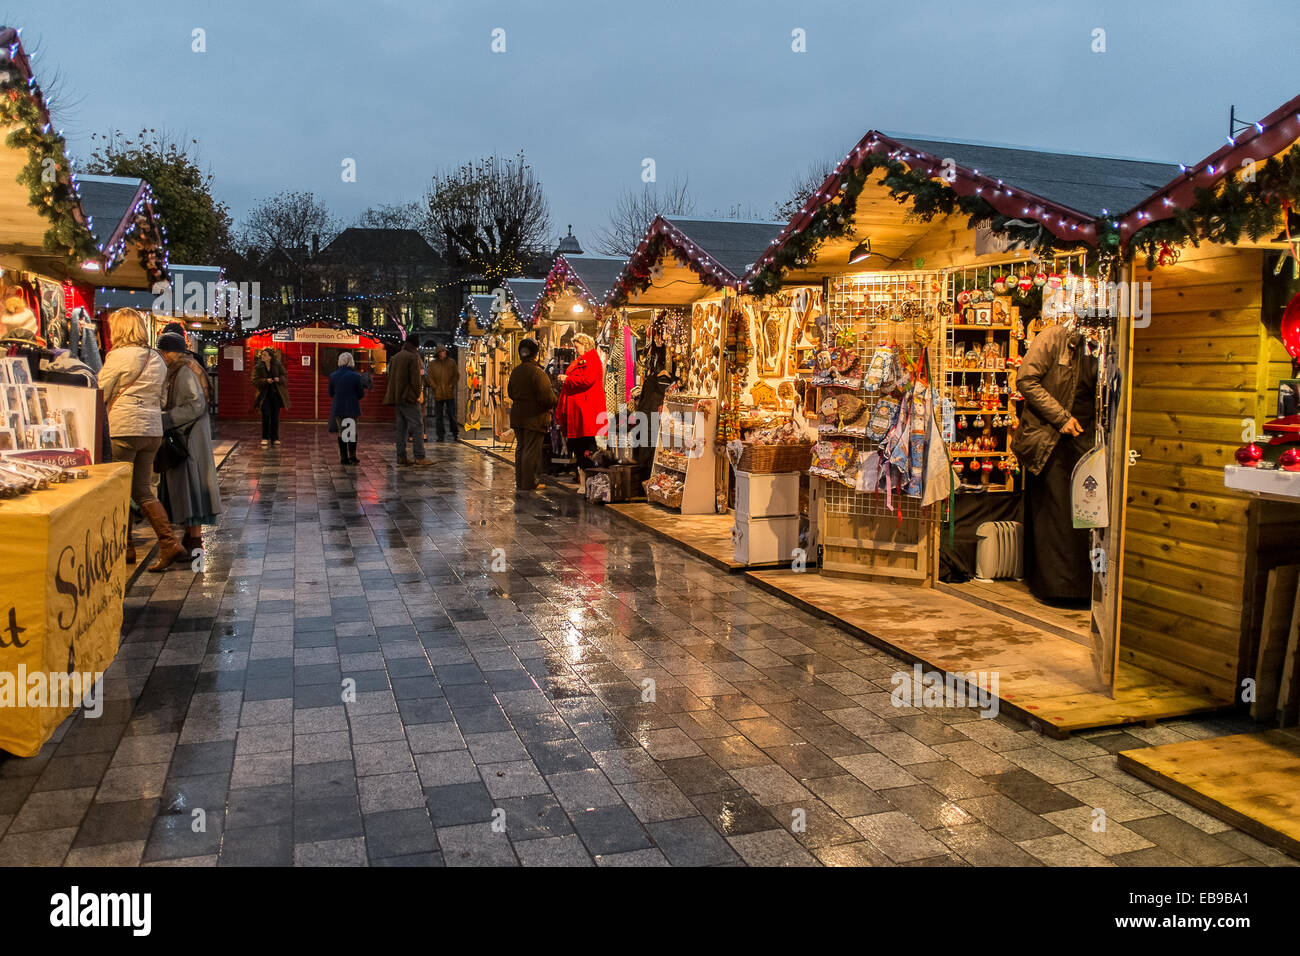 Salisbury 27th November 2014 Salisbury Christmas Market Openning night crowds gathered despite the weather Chalets selling Christmas goods and entertainment by local choirs . Rated by the Daily Telegraph in 2013 as one of the ‘Top 5 Christmas Markets in the UK. Credit:  Paul Chambers/Alamy Live News Stock Photo